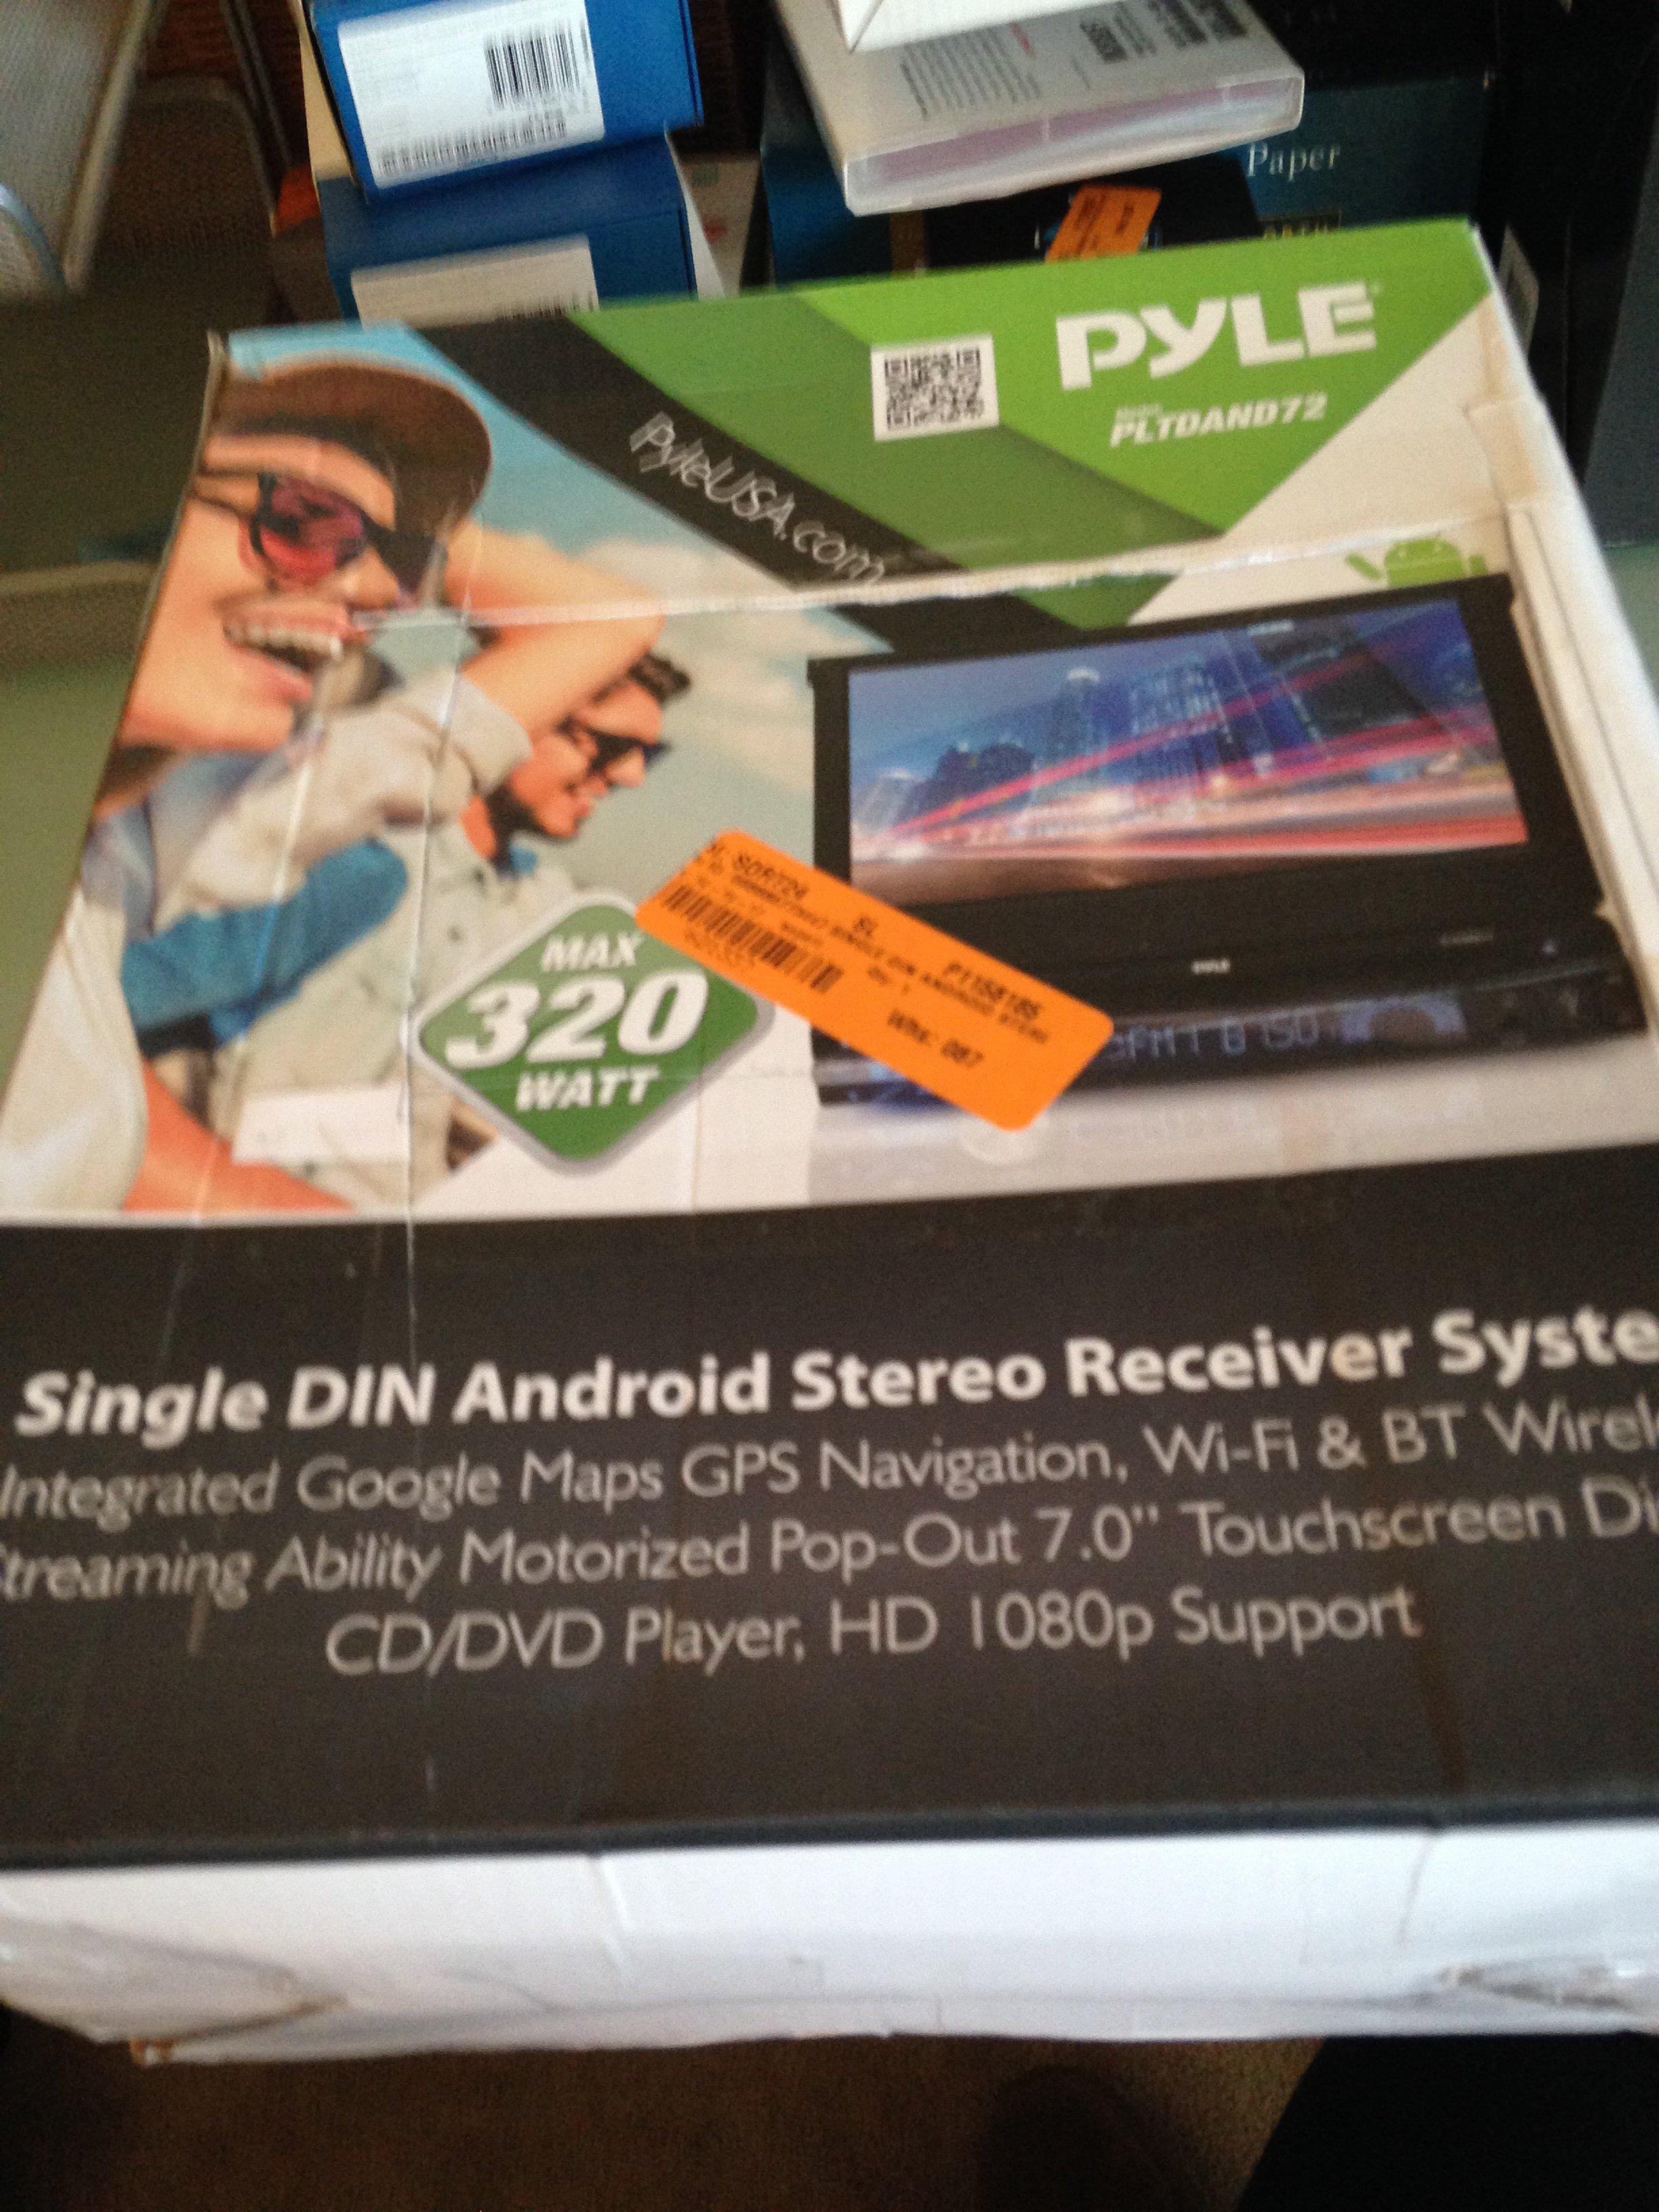 pyle single din 7" DIN ANDROID RECEIVER TOUCHSCREEN DISPLAY WIFI GPS FM  NEW BLUETOOTh